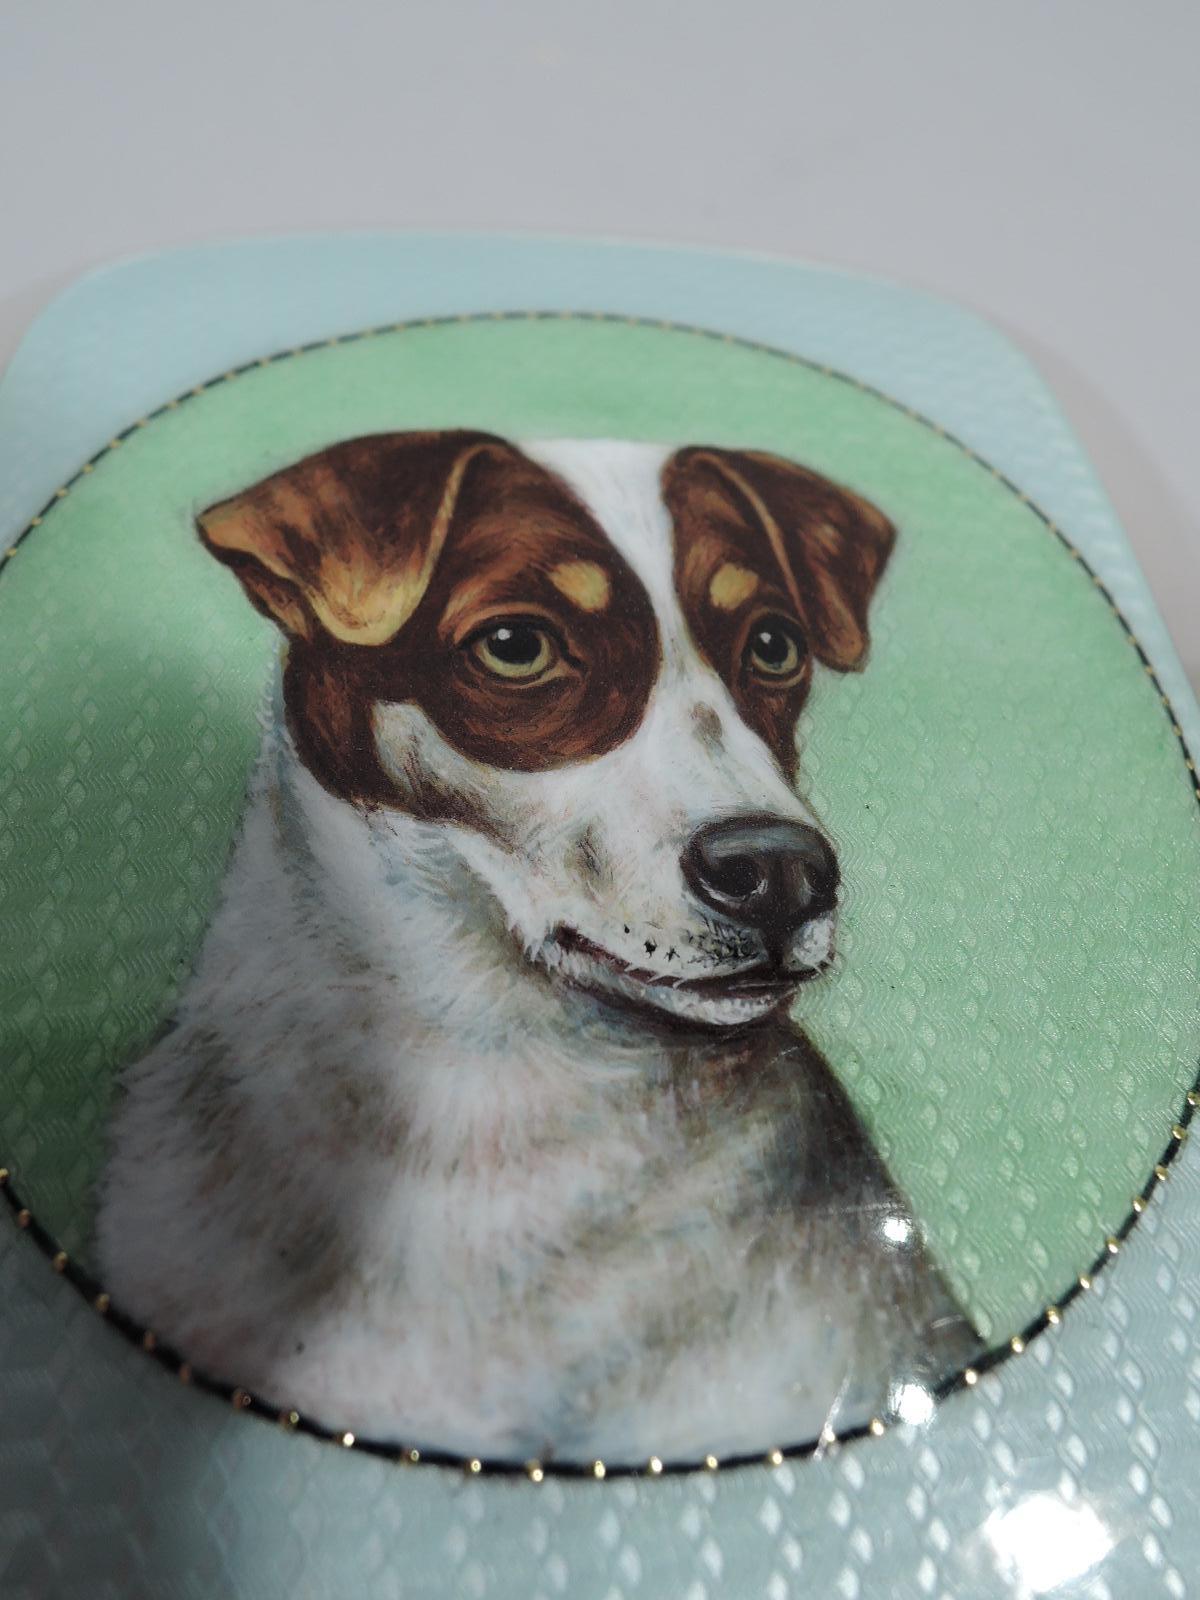 European silver and enameled dog case, ca 1910. Rectangular, curved, and hinged. On cover is the bust of a Jack Russell terrier set in green guilloche rondel. A super-cute pup portrait with floppy ears and concentrated gaze. Back plain with engraved